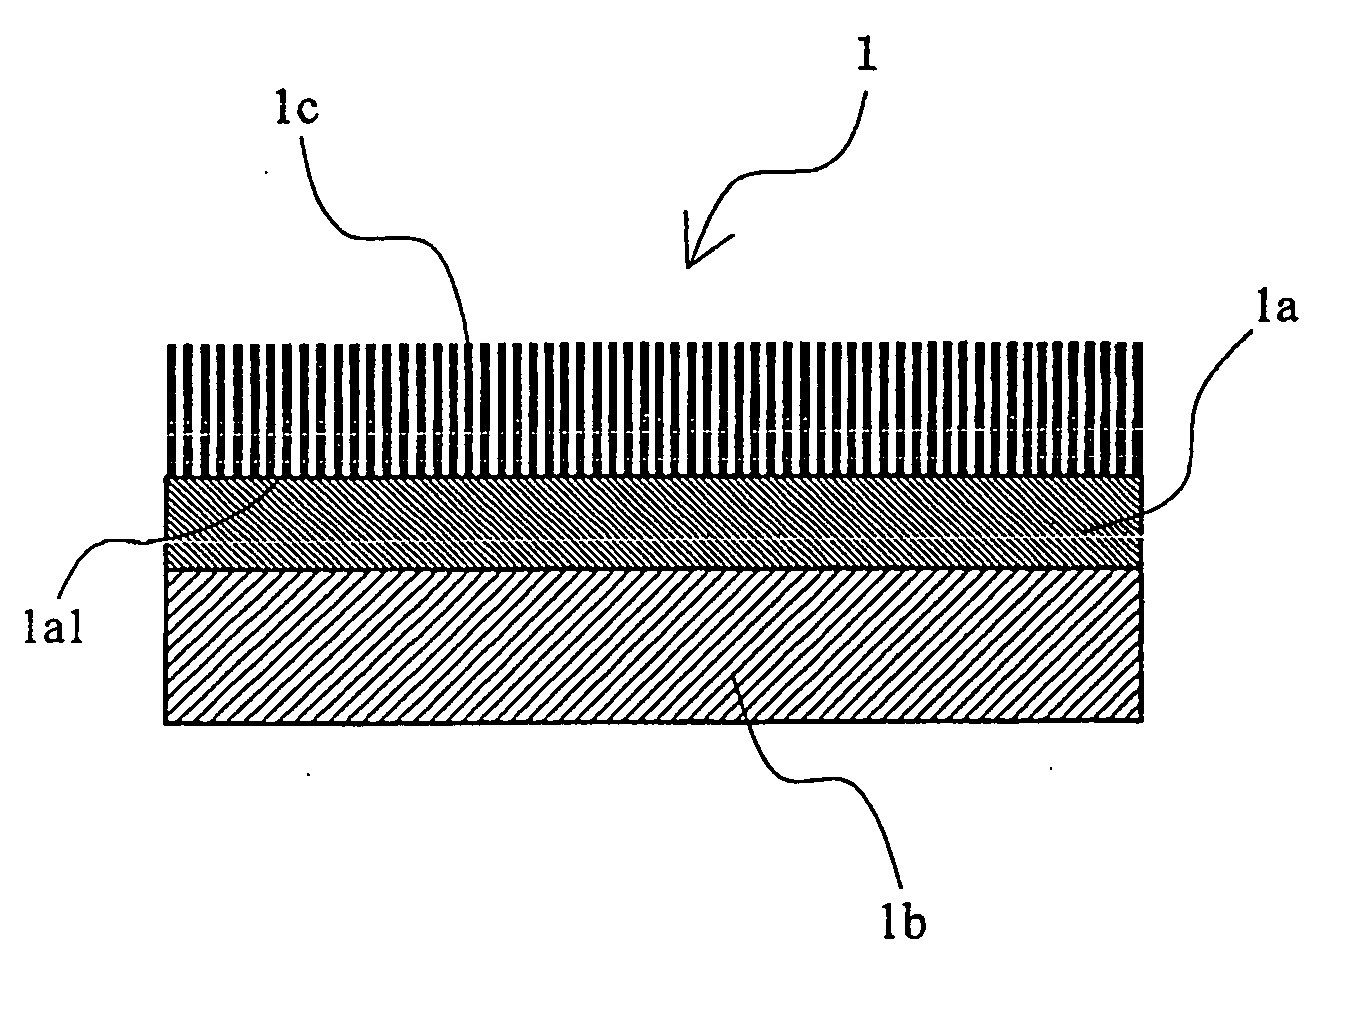 Structure having a characteristic of conducting or absorbing electromagnetic waves